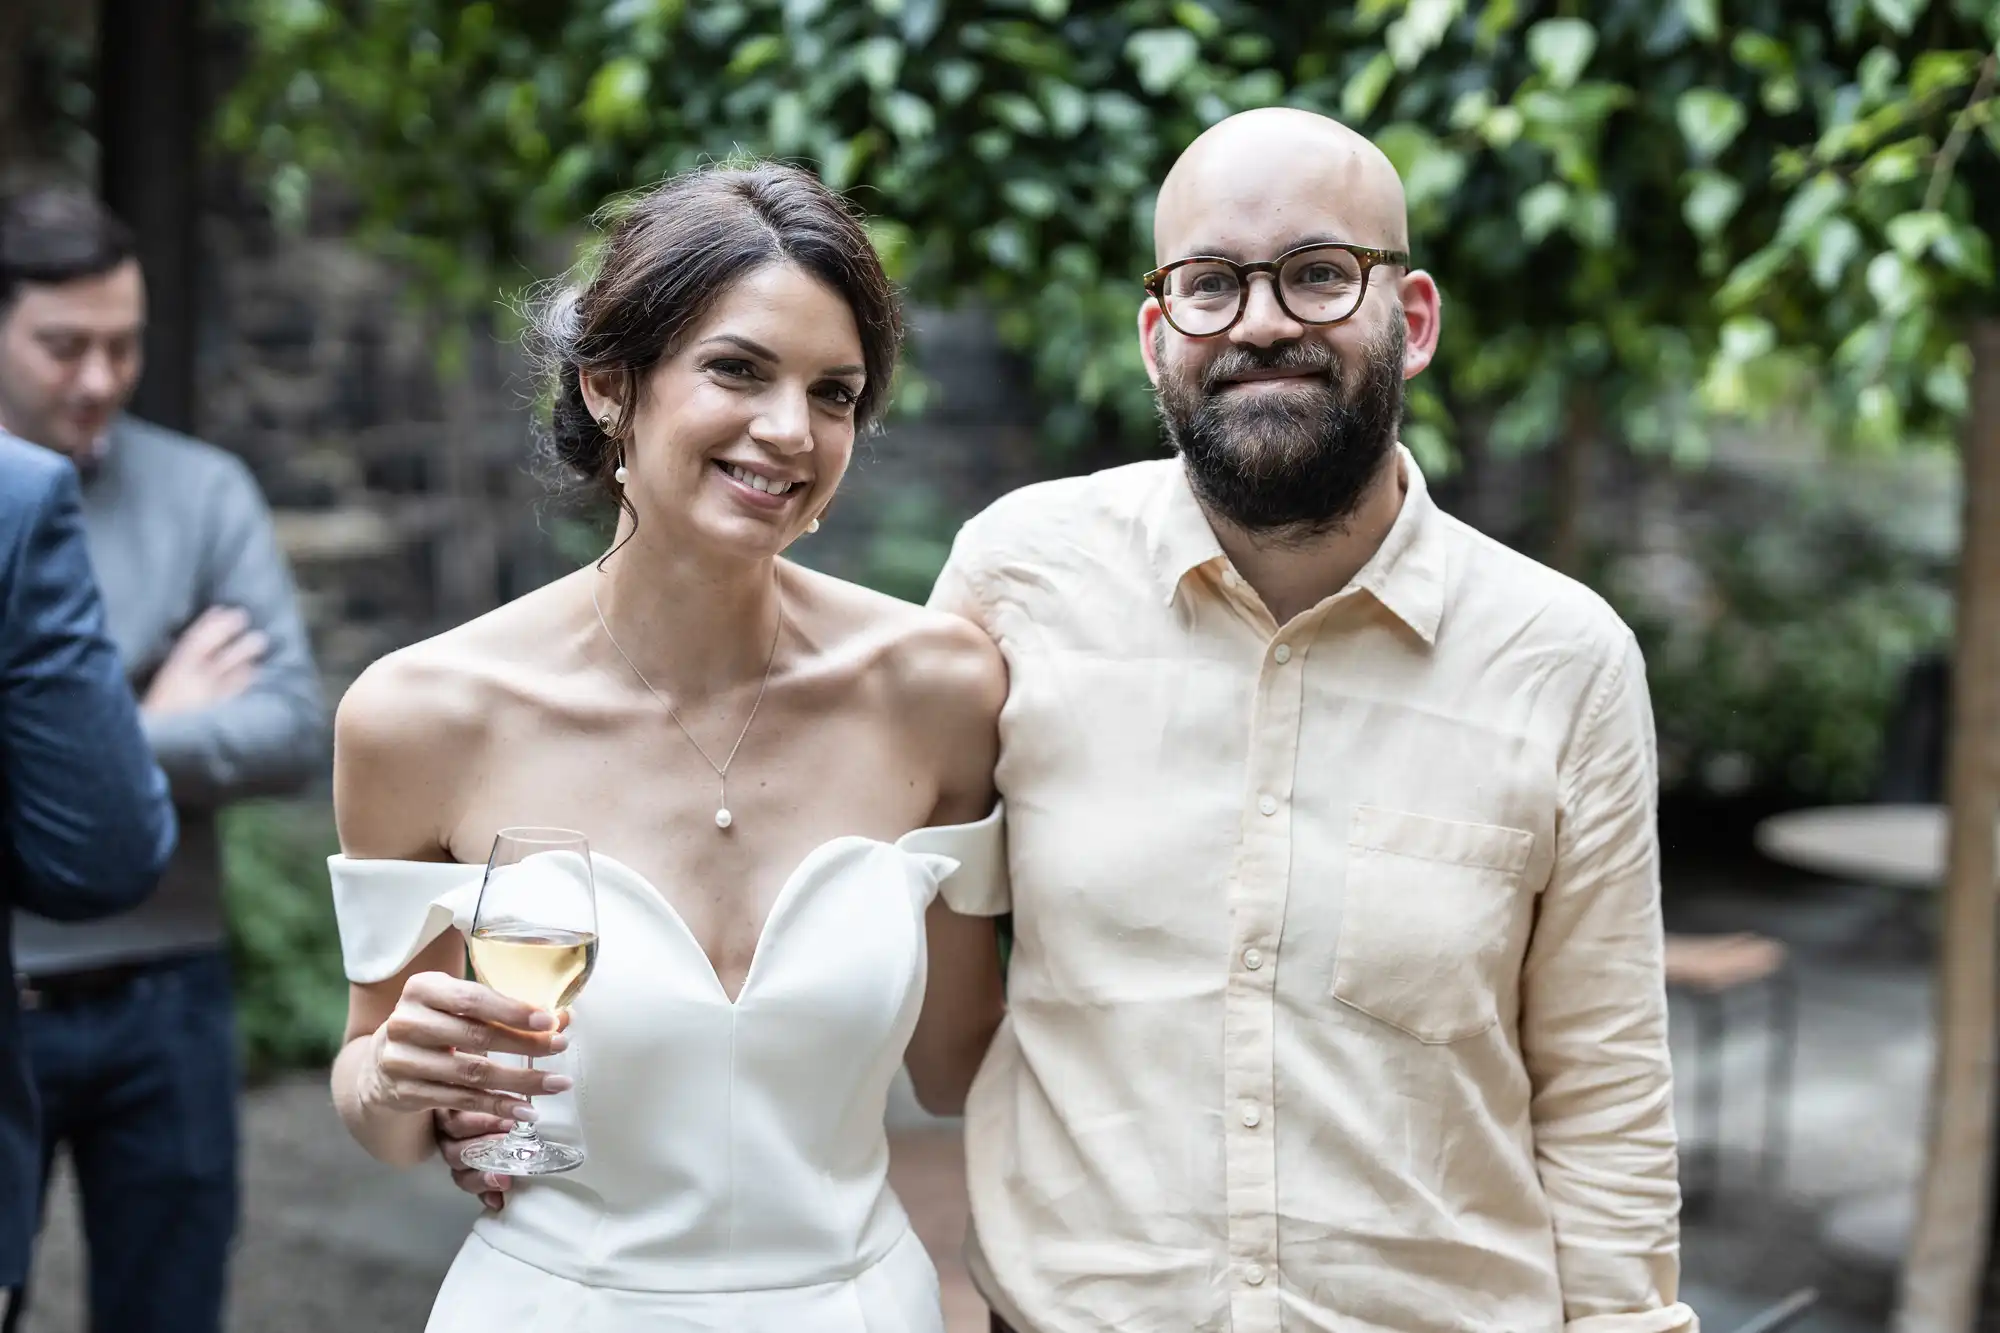 A bride in a white dress and a groom in a beige shirt, both smiling and standing outdoors with the bride holding a glass of wine.